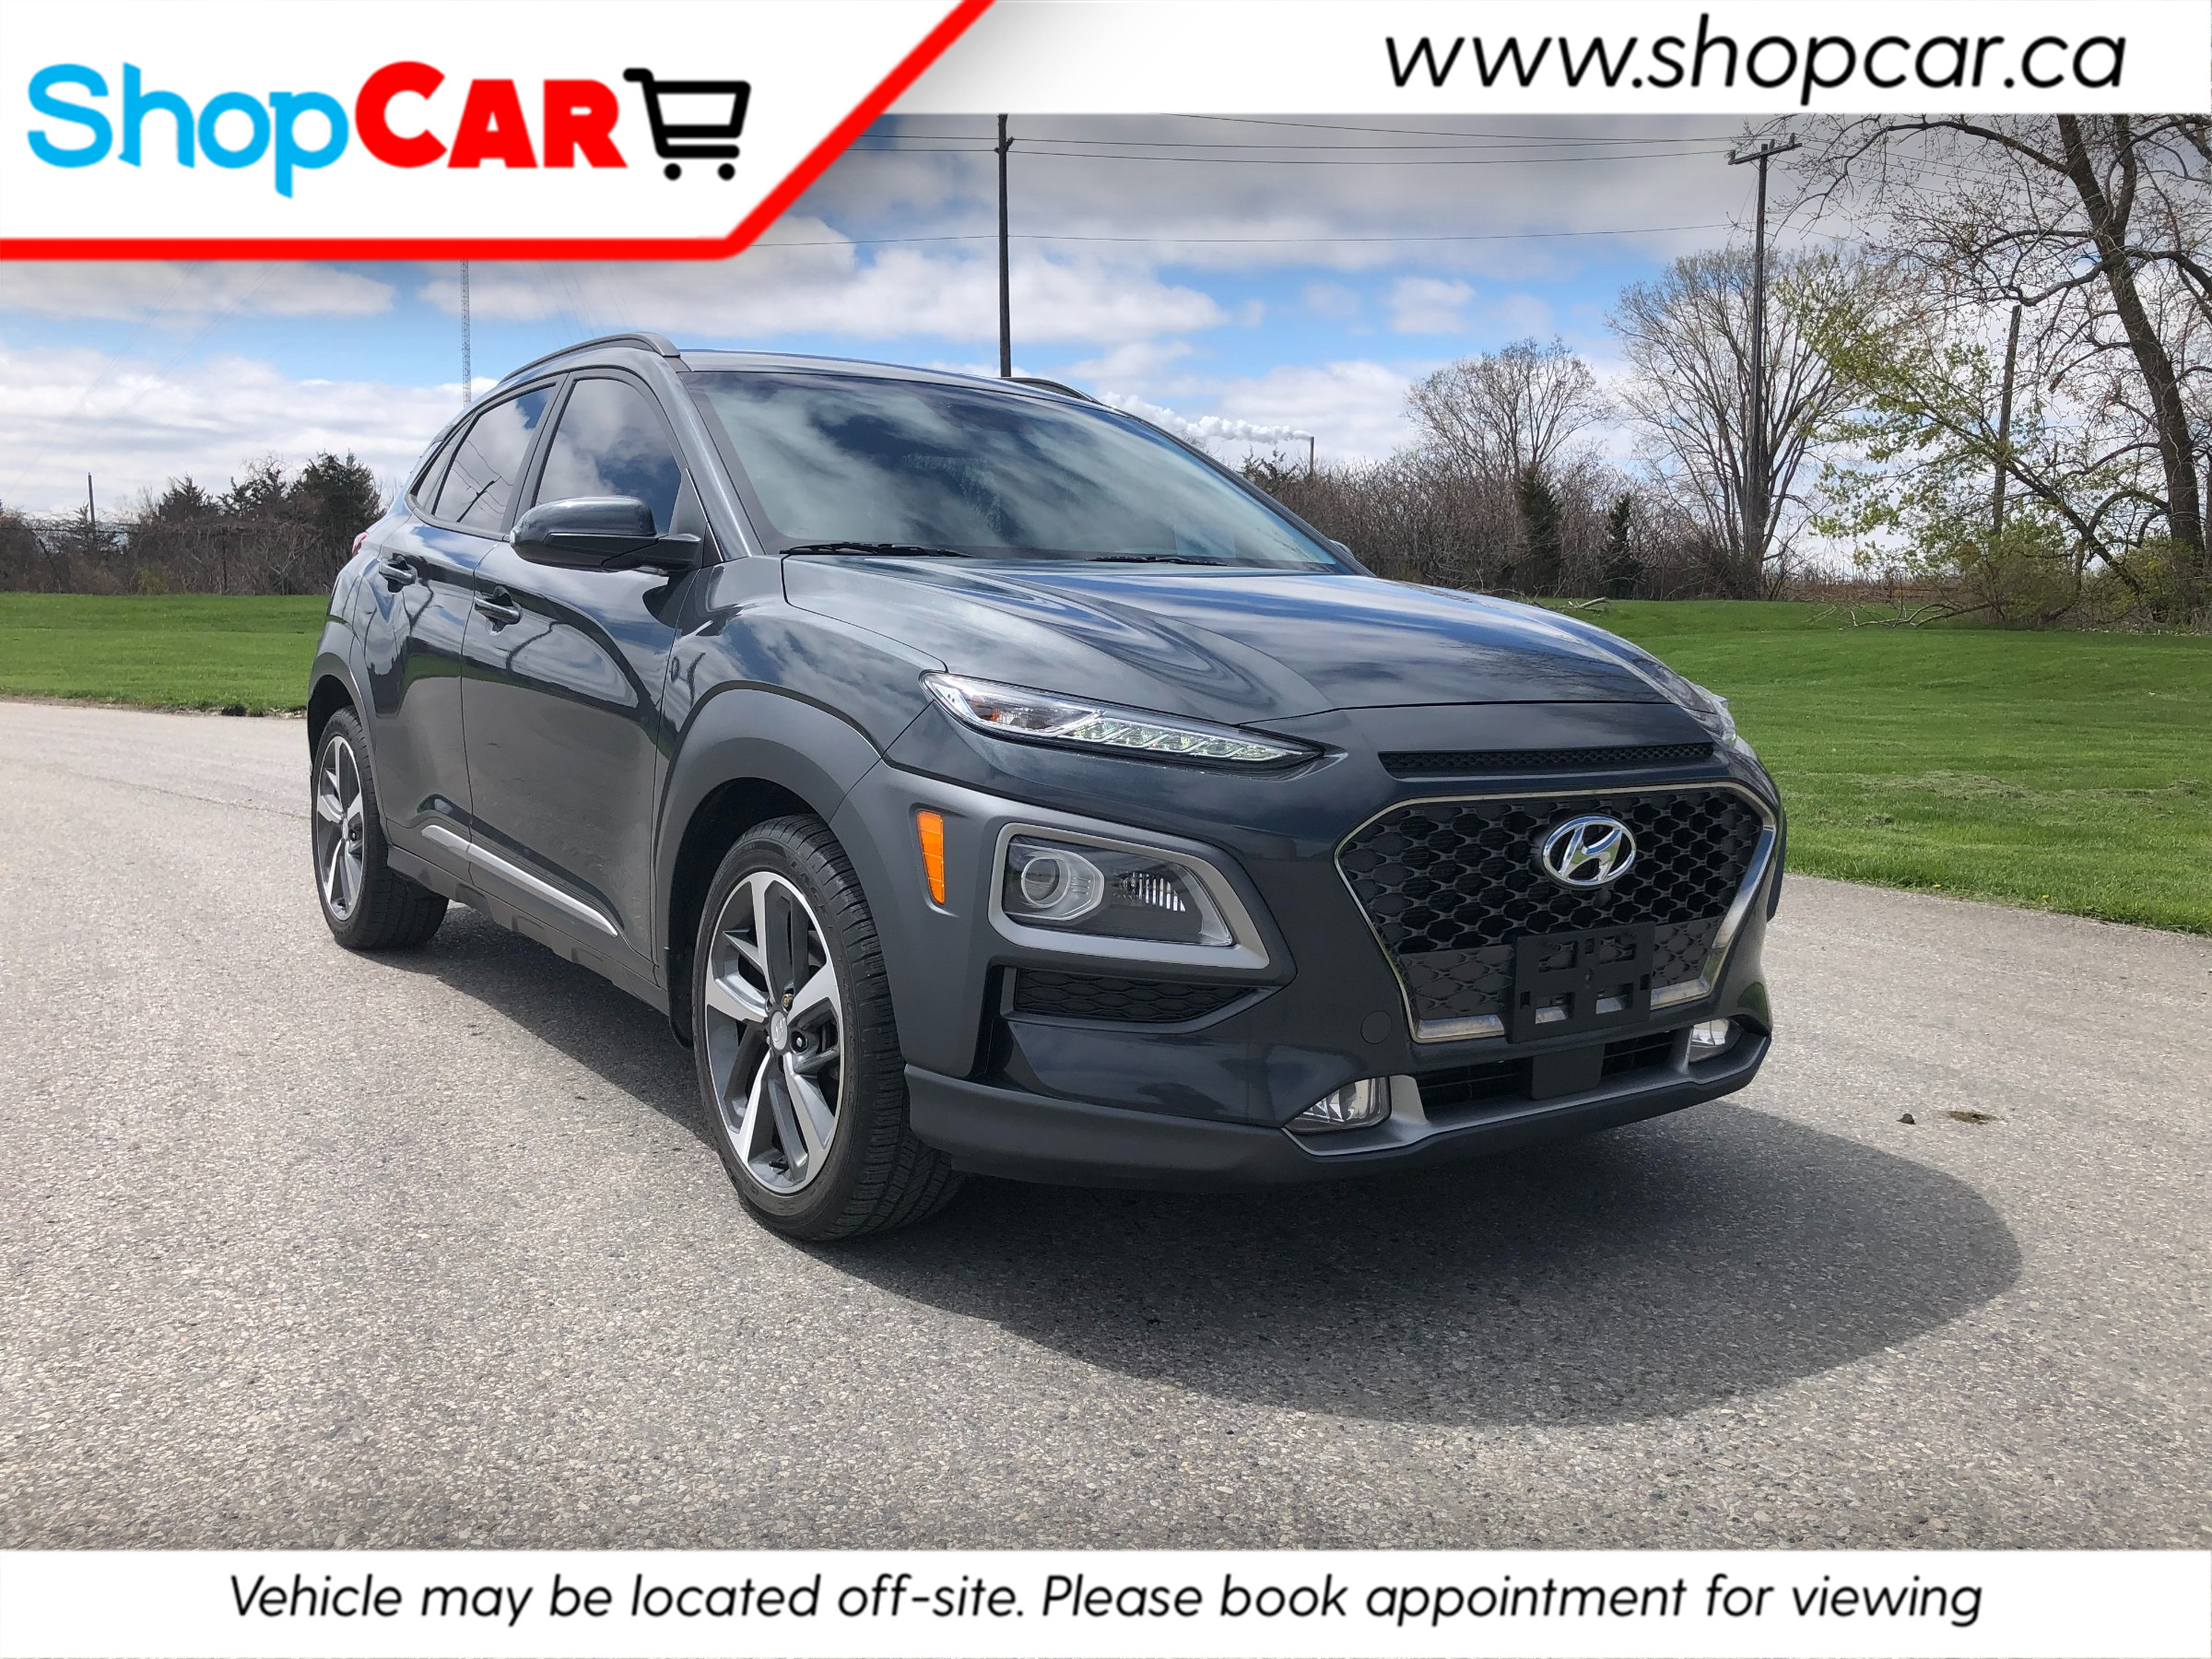 2019 Hyundai Kona New Arrival | Low KMs | AWD | Leather | Roof